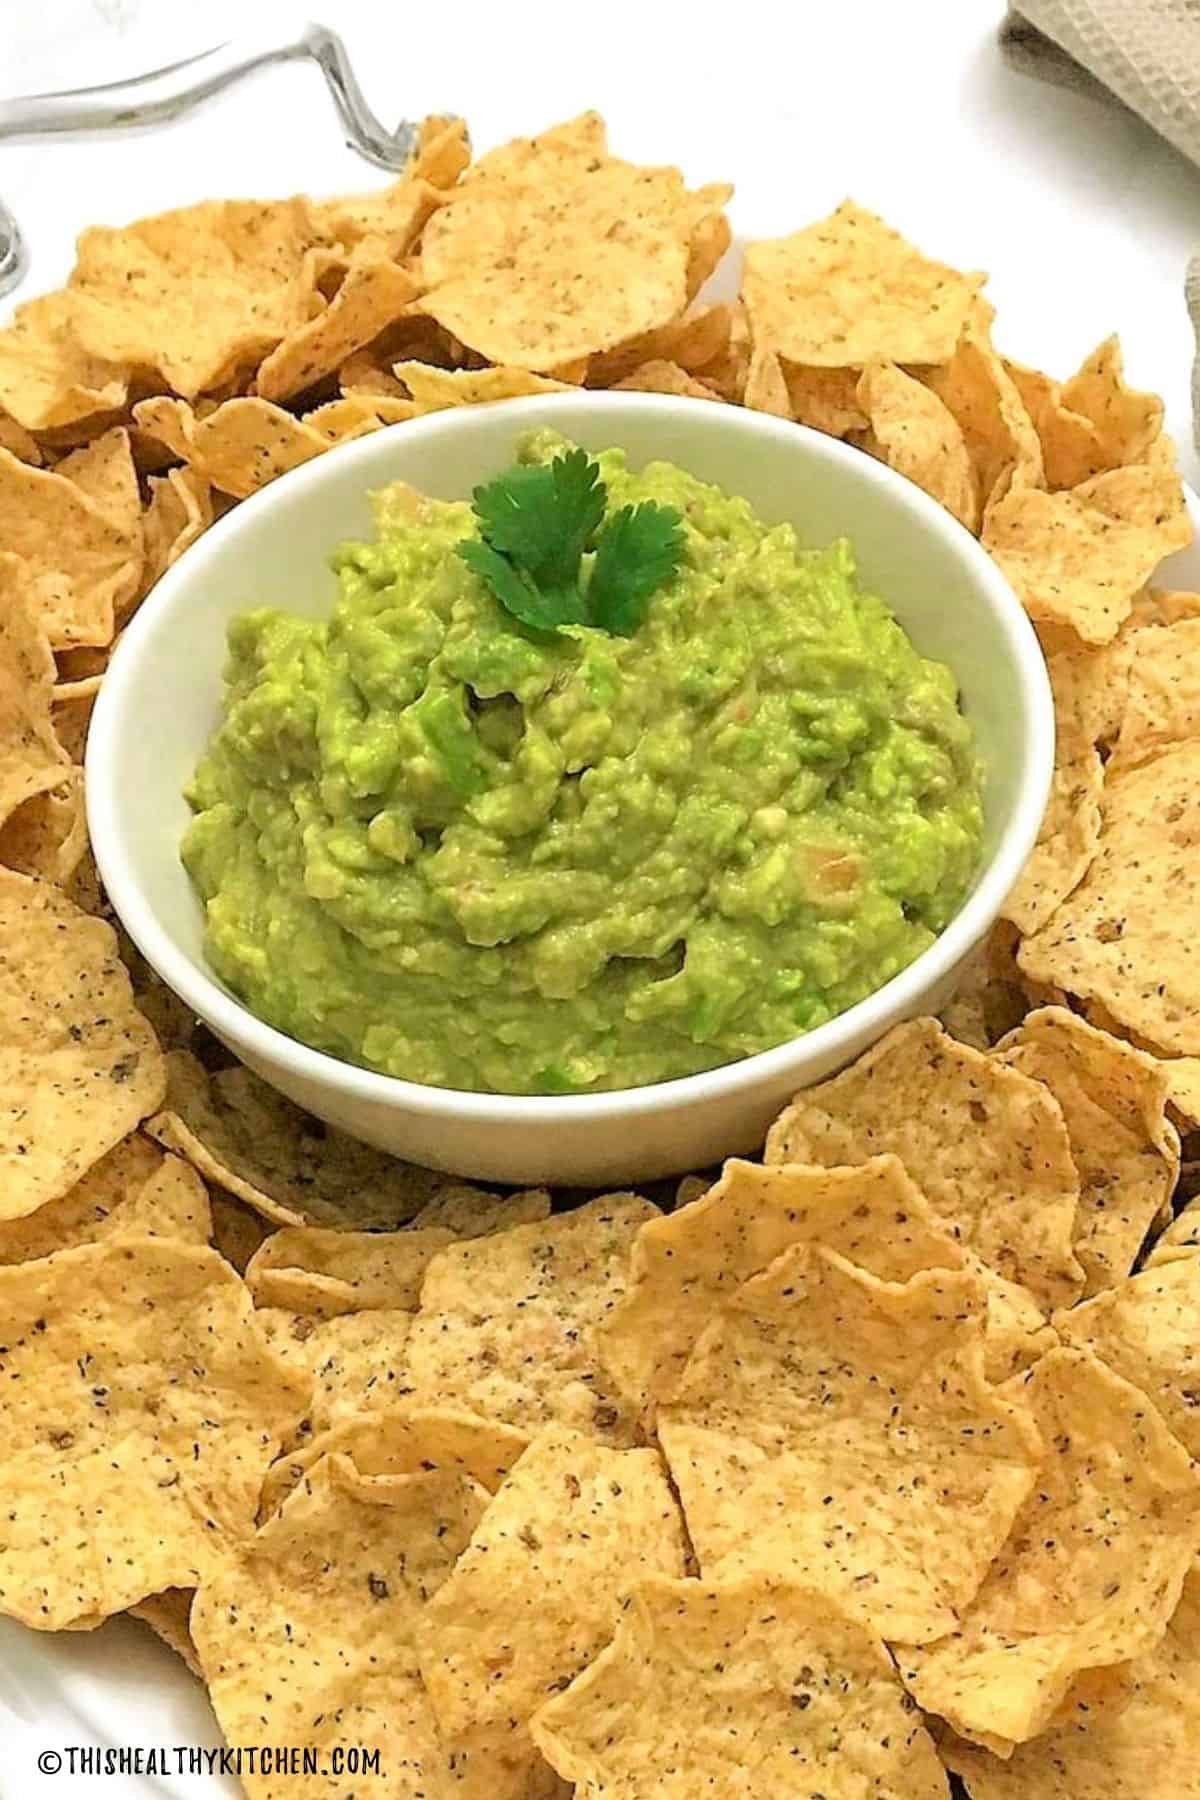 Platter of tortilla chips with bowl of guacamole in the middle.